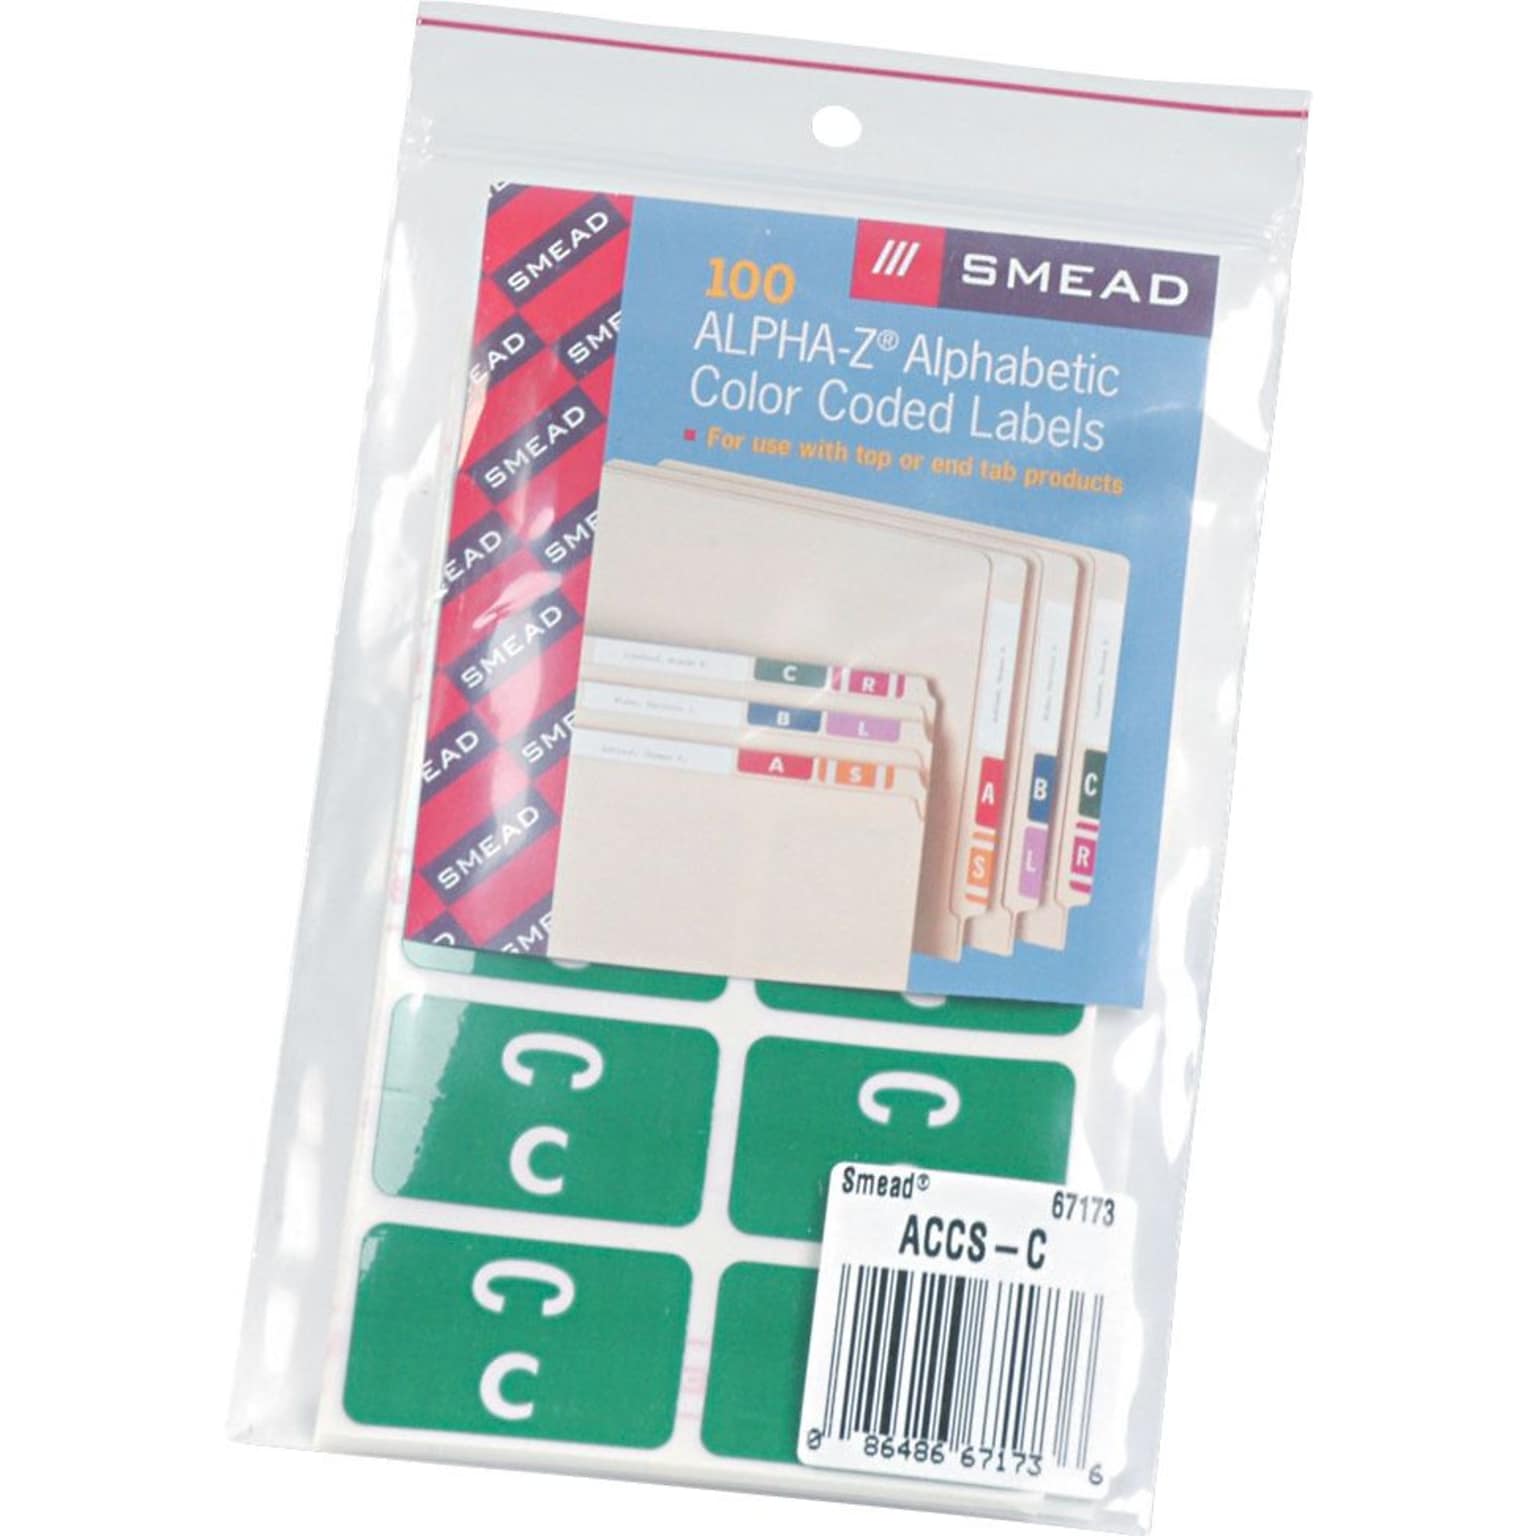 Smead AlphaZ ACCS Color-Coded Alphabetic Labels, C, Dark Green w/White, 100/Pack (67173)